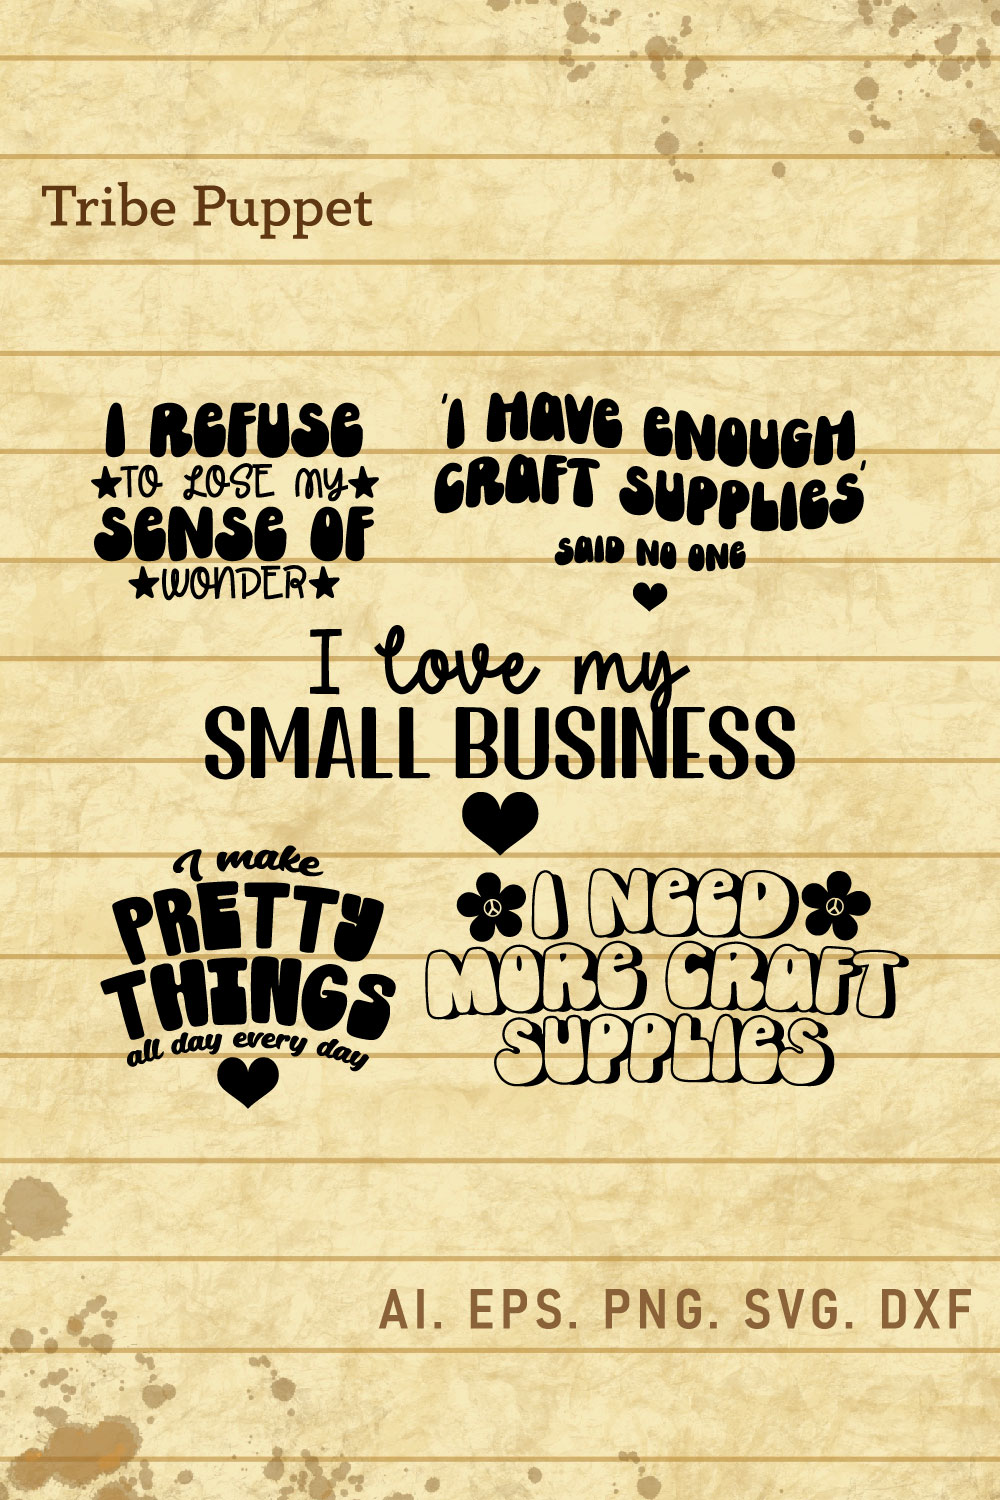 Small business owner quotes and sayings 07 pinterest preview image.